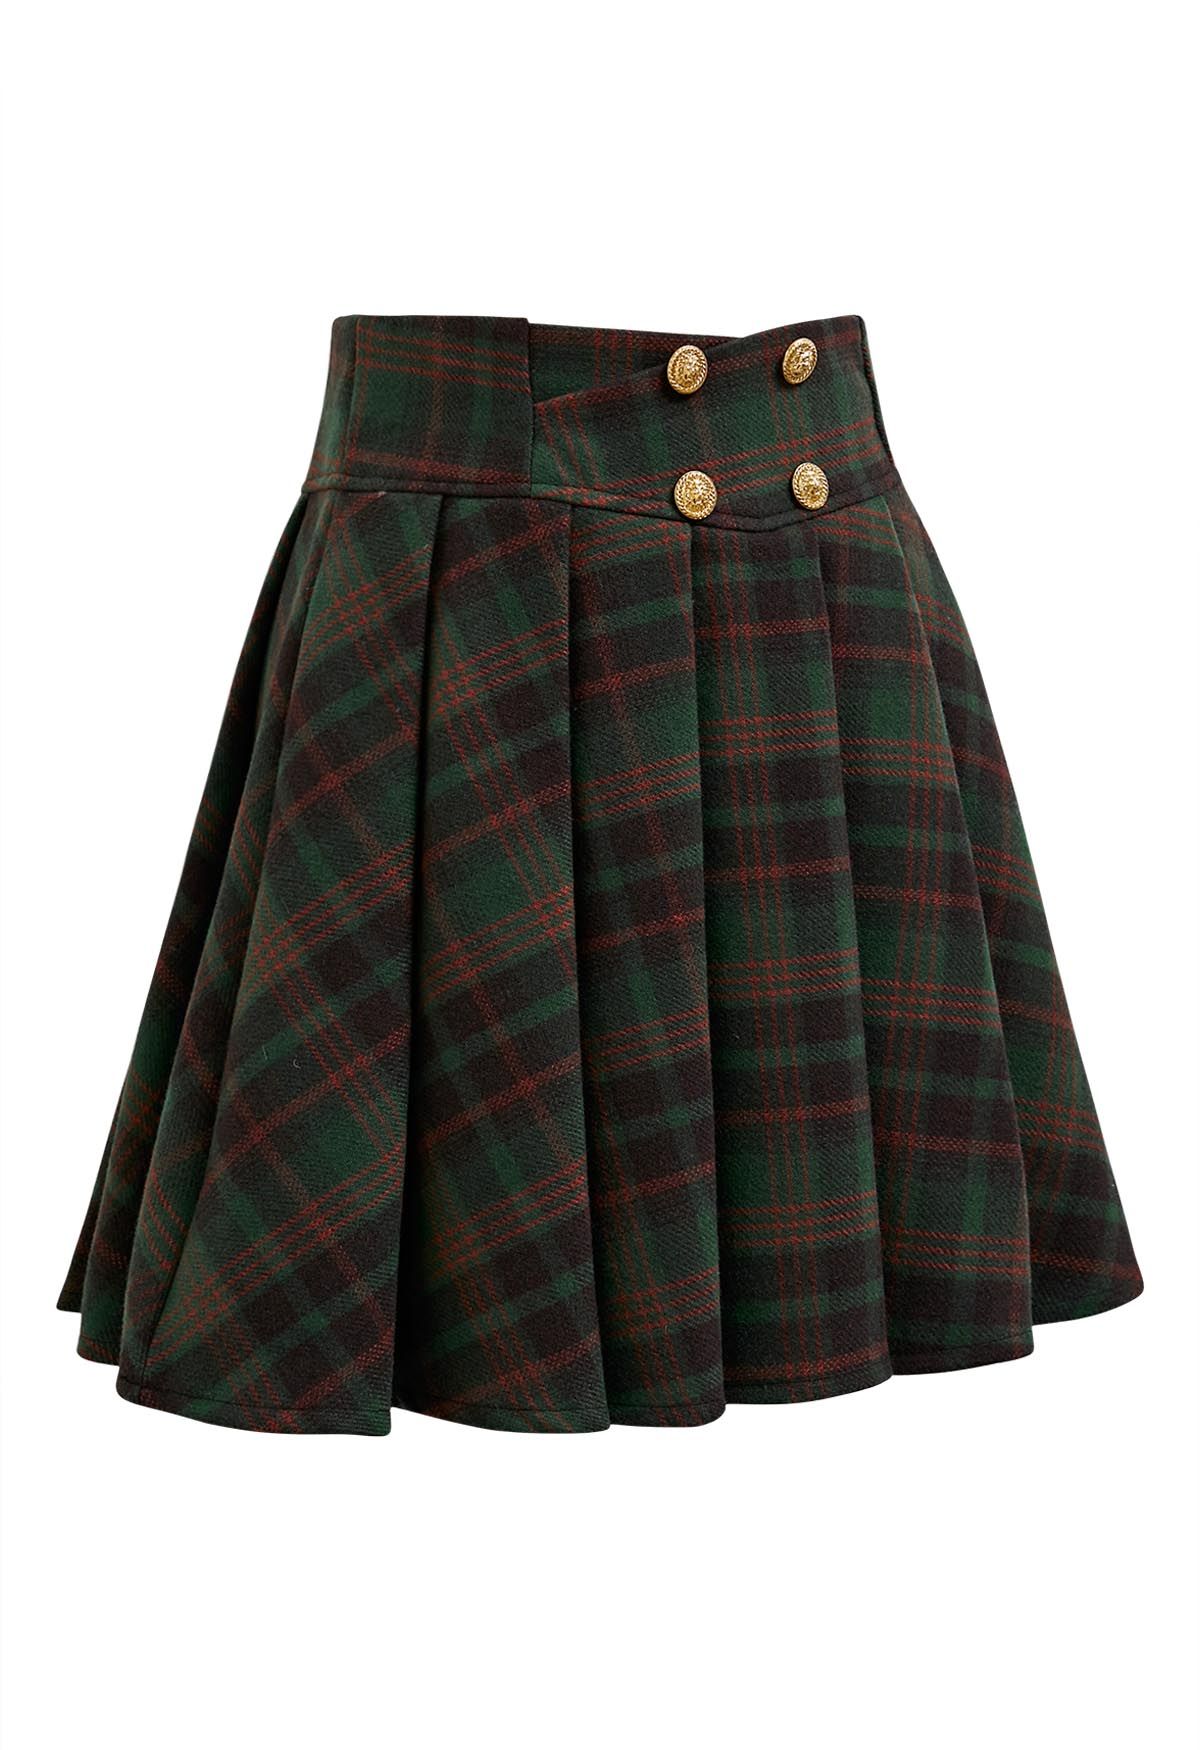 Golden Button Wool-Blend Pleated Mini Skirt in Green Plaid